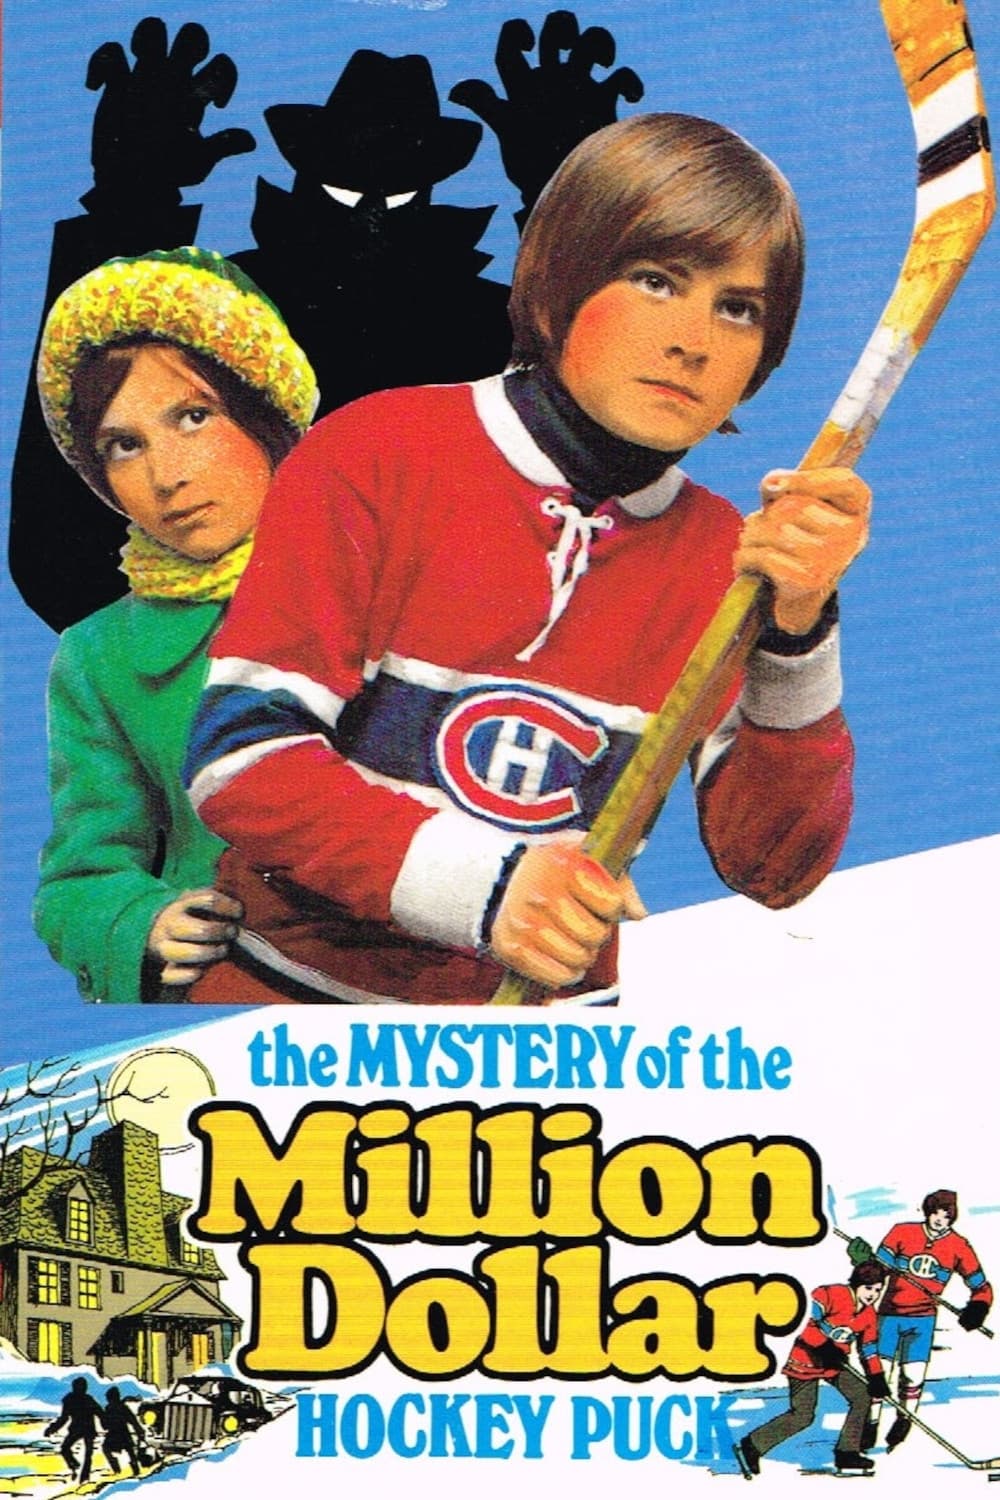 The Mystery of the Million Dollar Hockey Puck